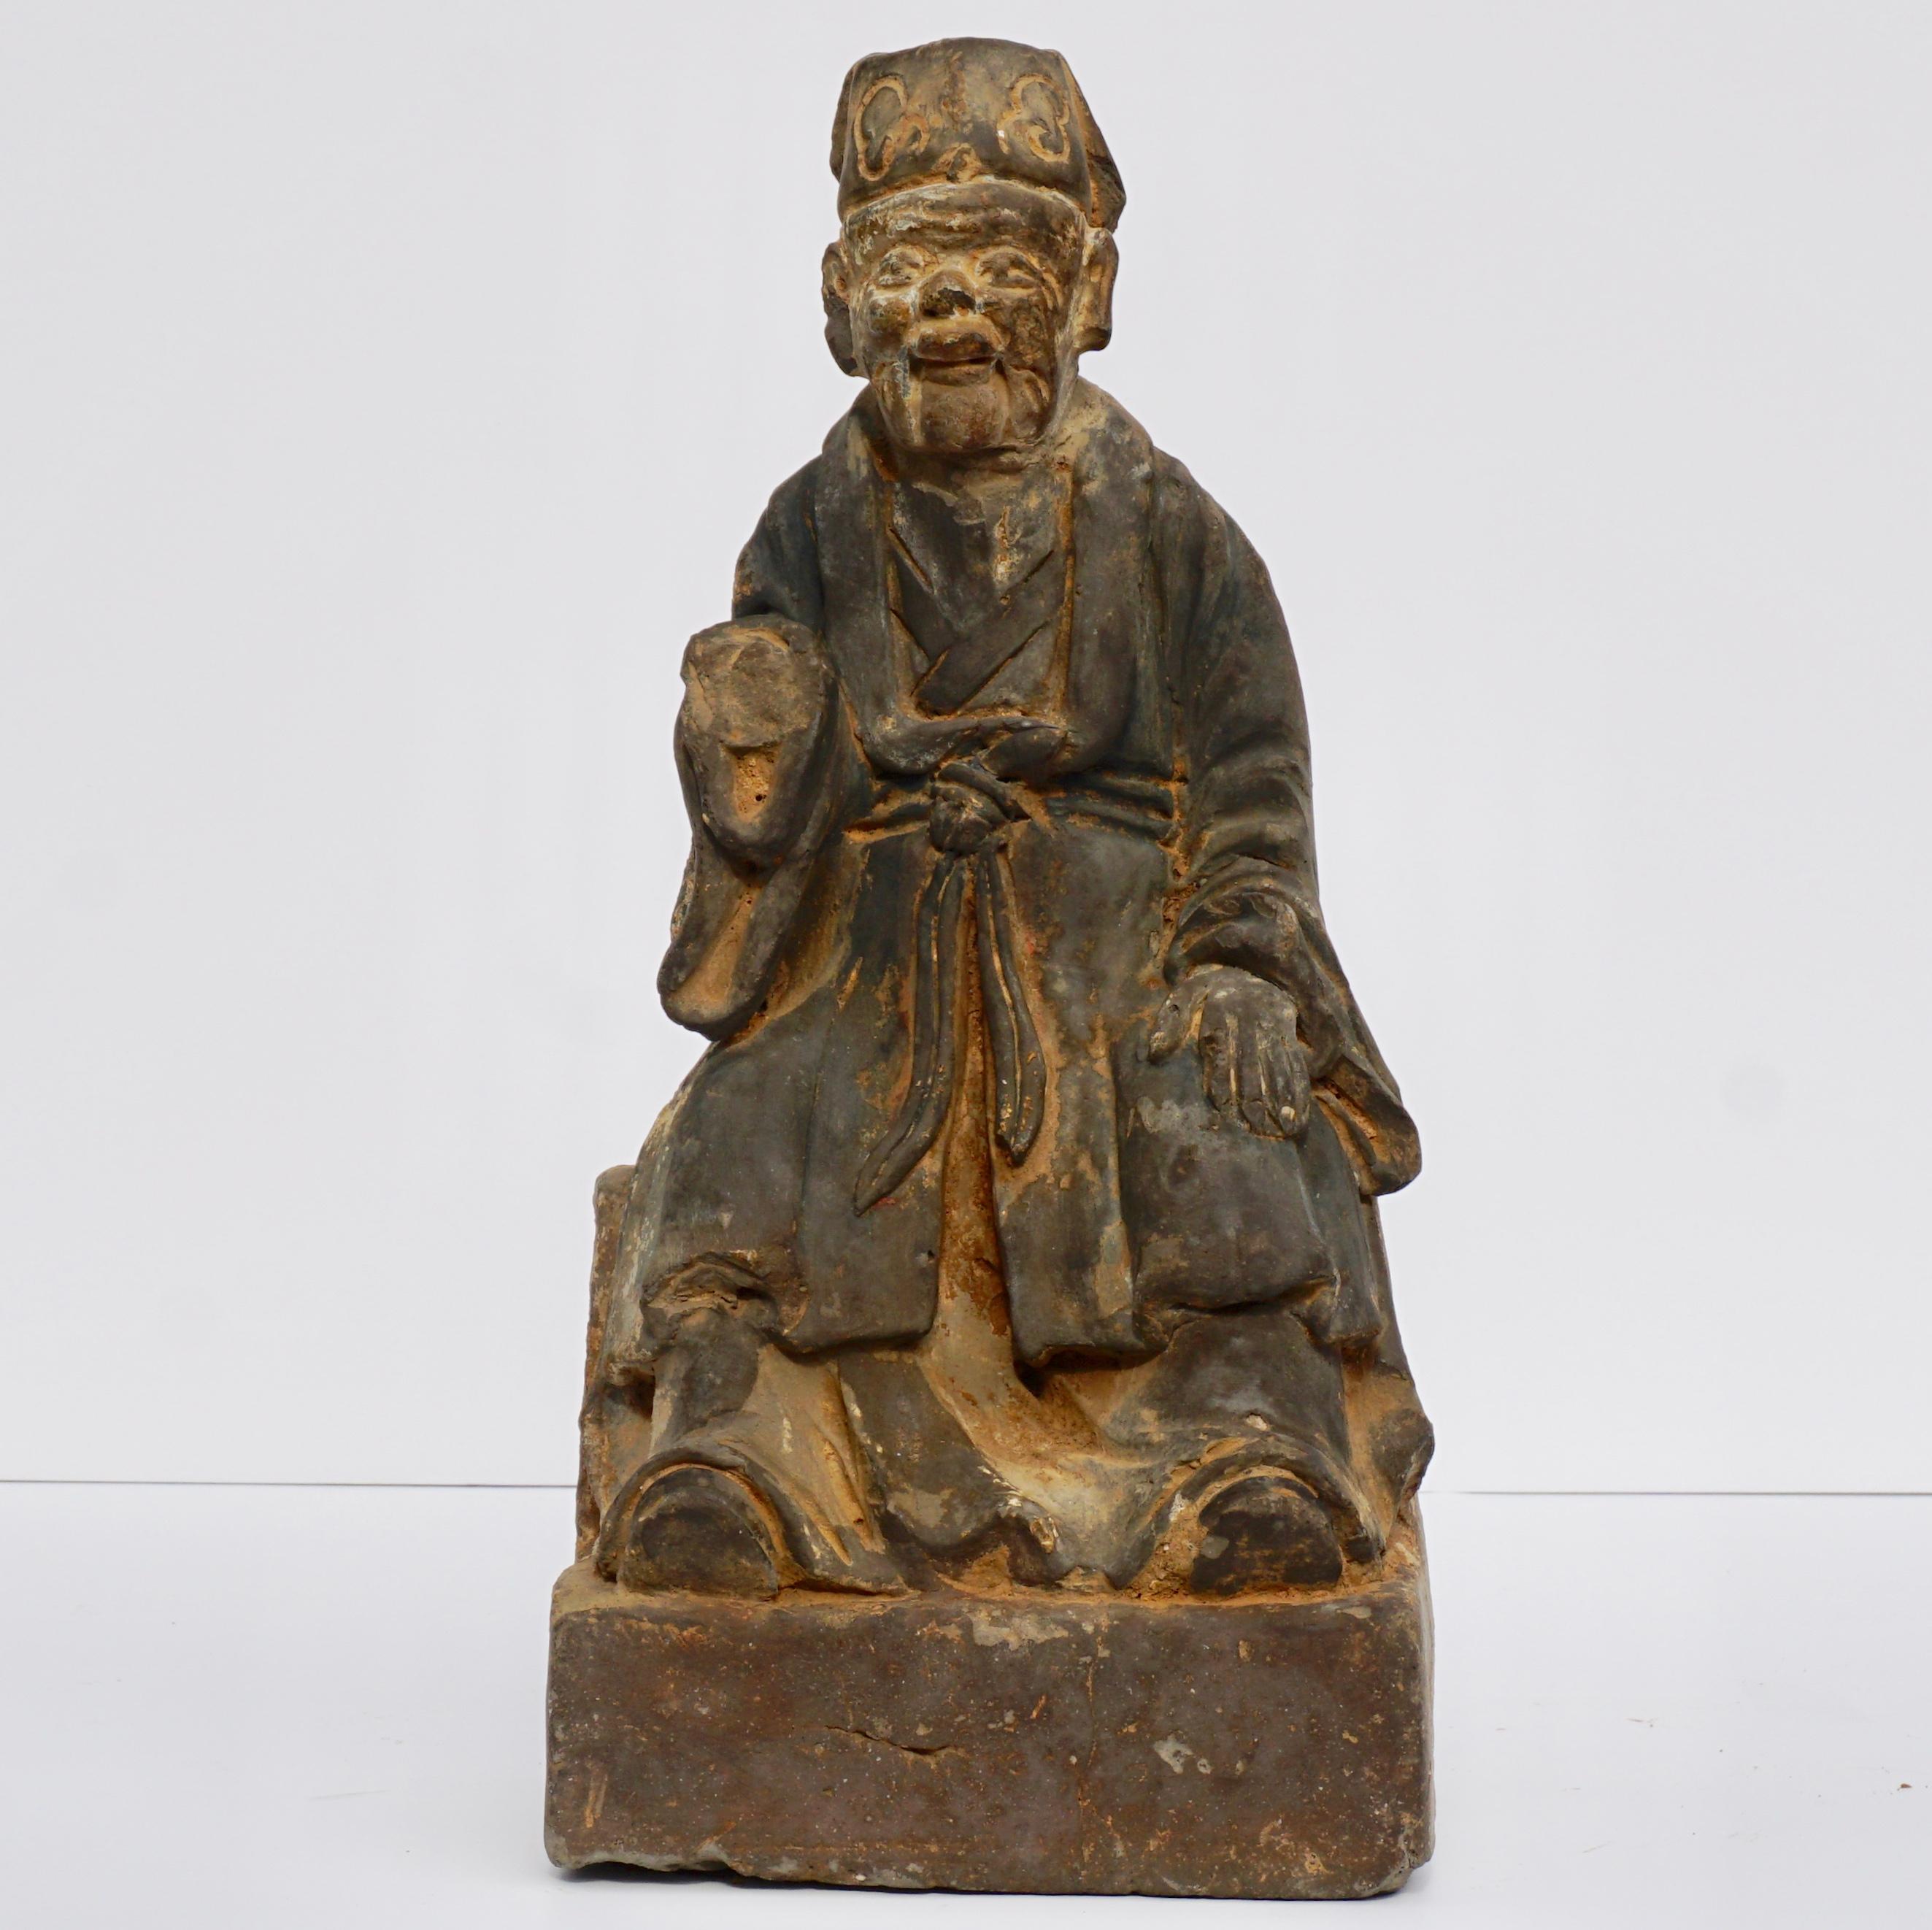 An ancient Chinese carved and painted grey stone sculpture of a dignitary, Laohan, Deity, Emperor or king from the 12th-14th century. Yuan -Ming Dynasty. A seated elderly man robes with a dignitary hat. The figure appears Taoist to Early Buddhist.